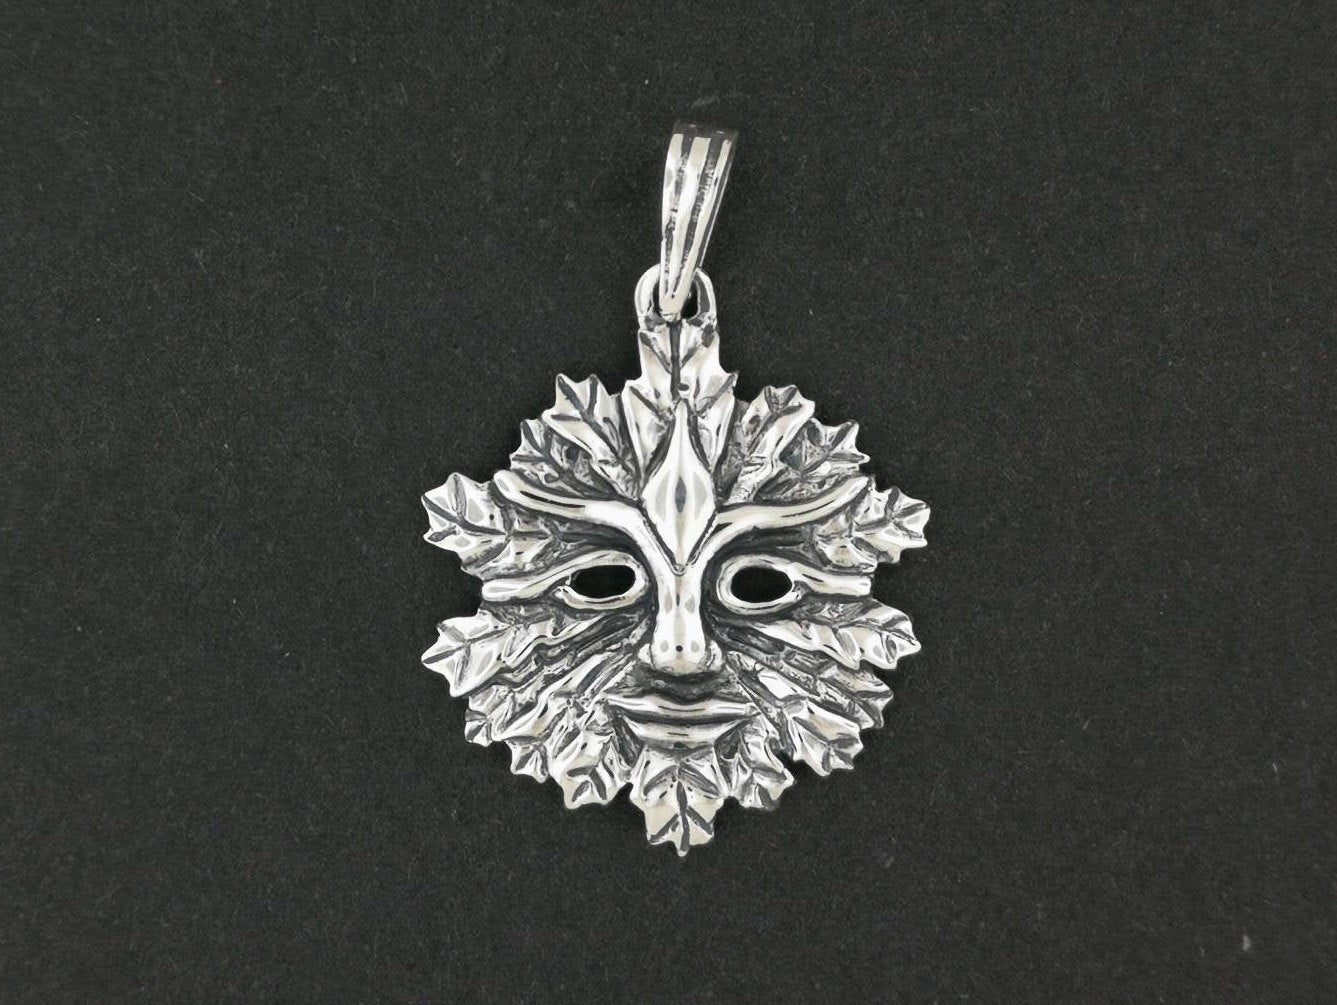 Green Man Pendant With Open Eyes in Sterling Silver or Antique Bronze, Silver Pagan Jewelry, Silver Pagan Jewellery, Bronze Pagan Jewelry, Bronze Pagan Jewellery, Green Man Pendant, Silver Pagan Pendant, Bronze Pagan Pendant, Silver Wiccan Jewelry, Silver Wiccan Jewellery, Bronze Wiccan Jewelry, Bronze Wiccan Jewellery, Sterling Silver Witch Pendant, Antique Bronze Witch Pendant, Silver Greenman Pendant, Bronze Greenman Pendant, Silver Green Man Pendant, Bronze Green Man Pendant, Celtic Pagan Pendant